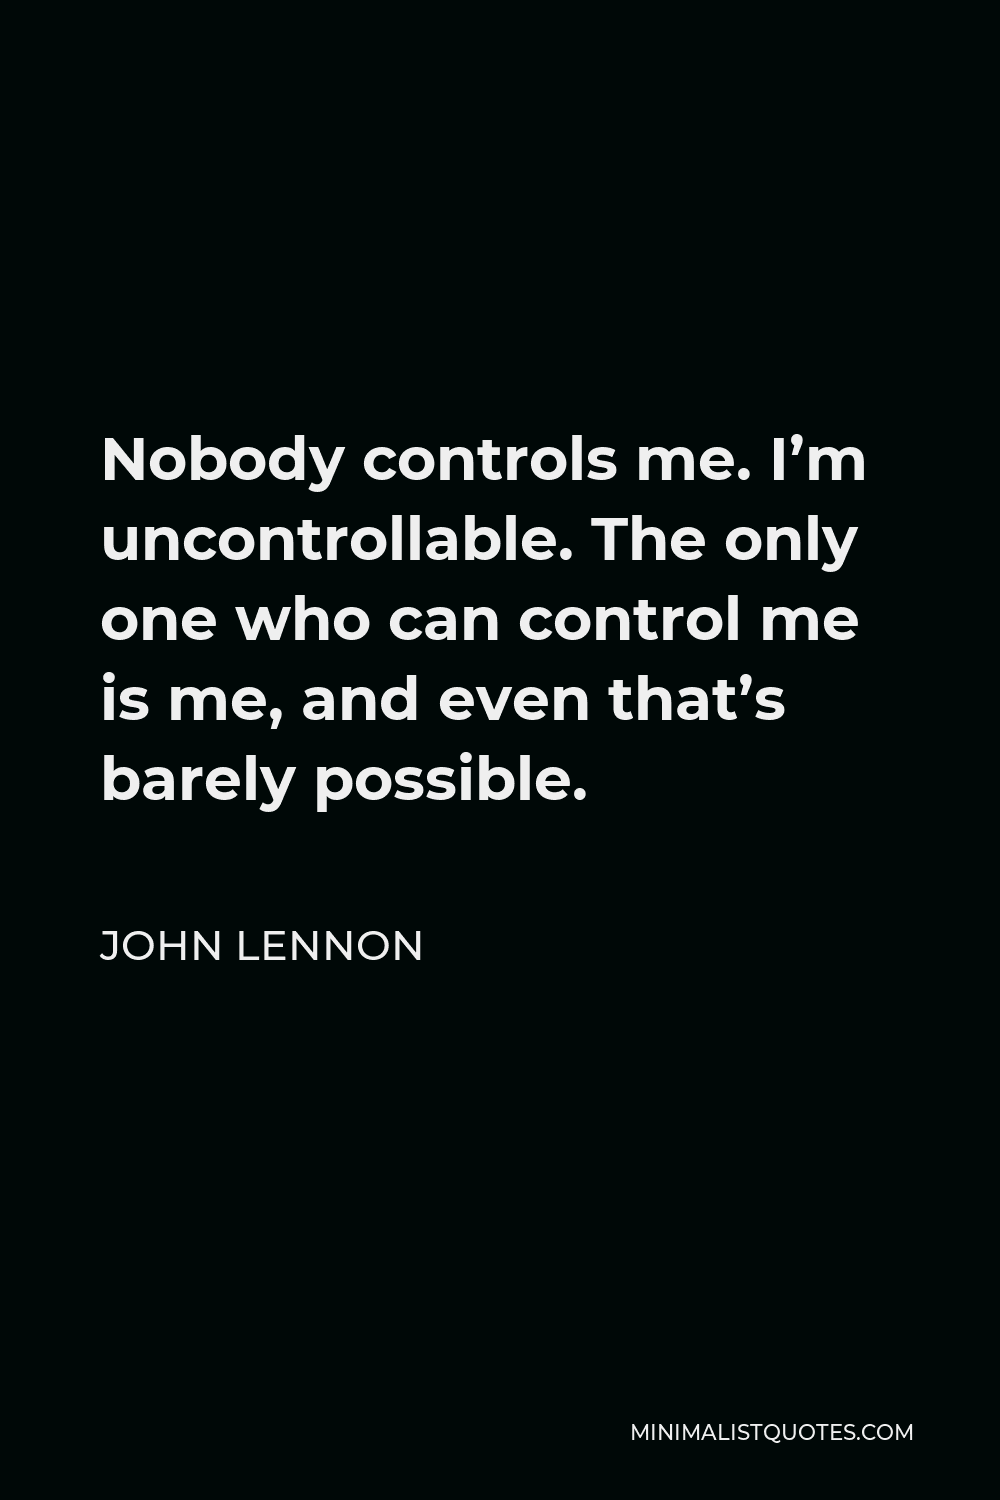 John Lennon Quote - Nobody controls me. I’m uncontrollable. The only one who can control me is me, and even that’s barely possible.